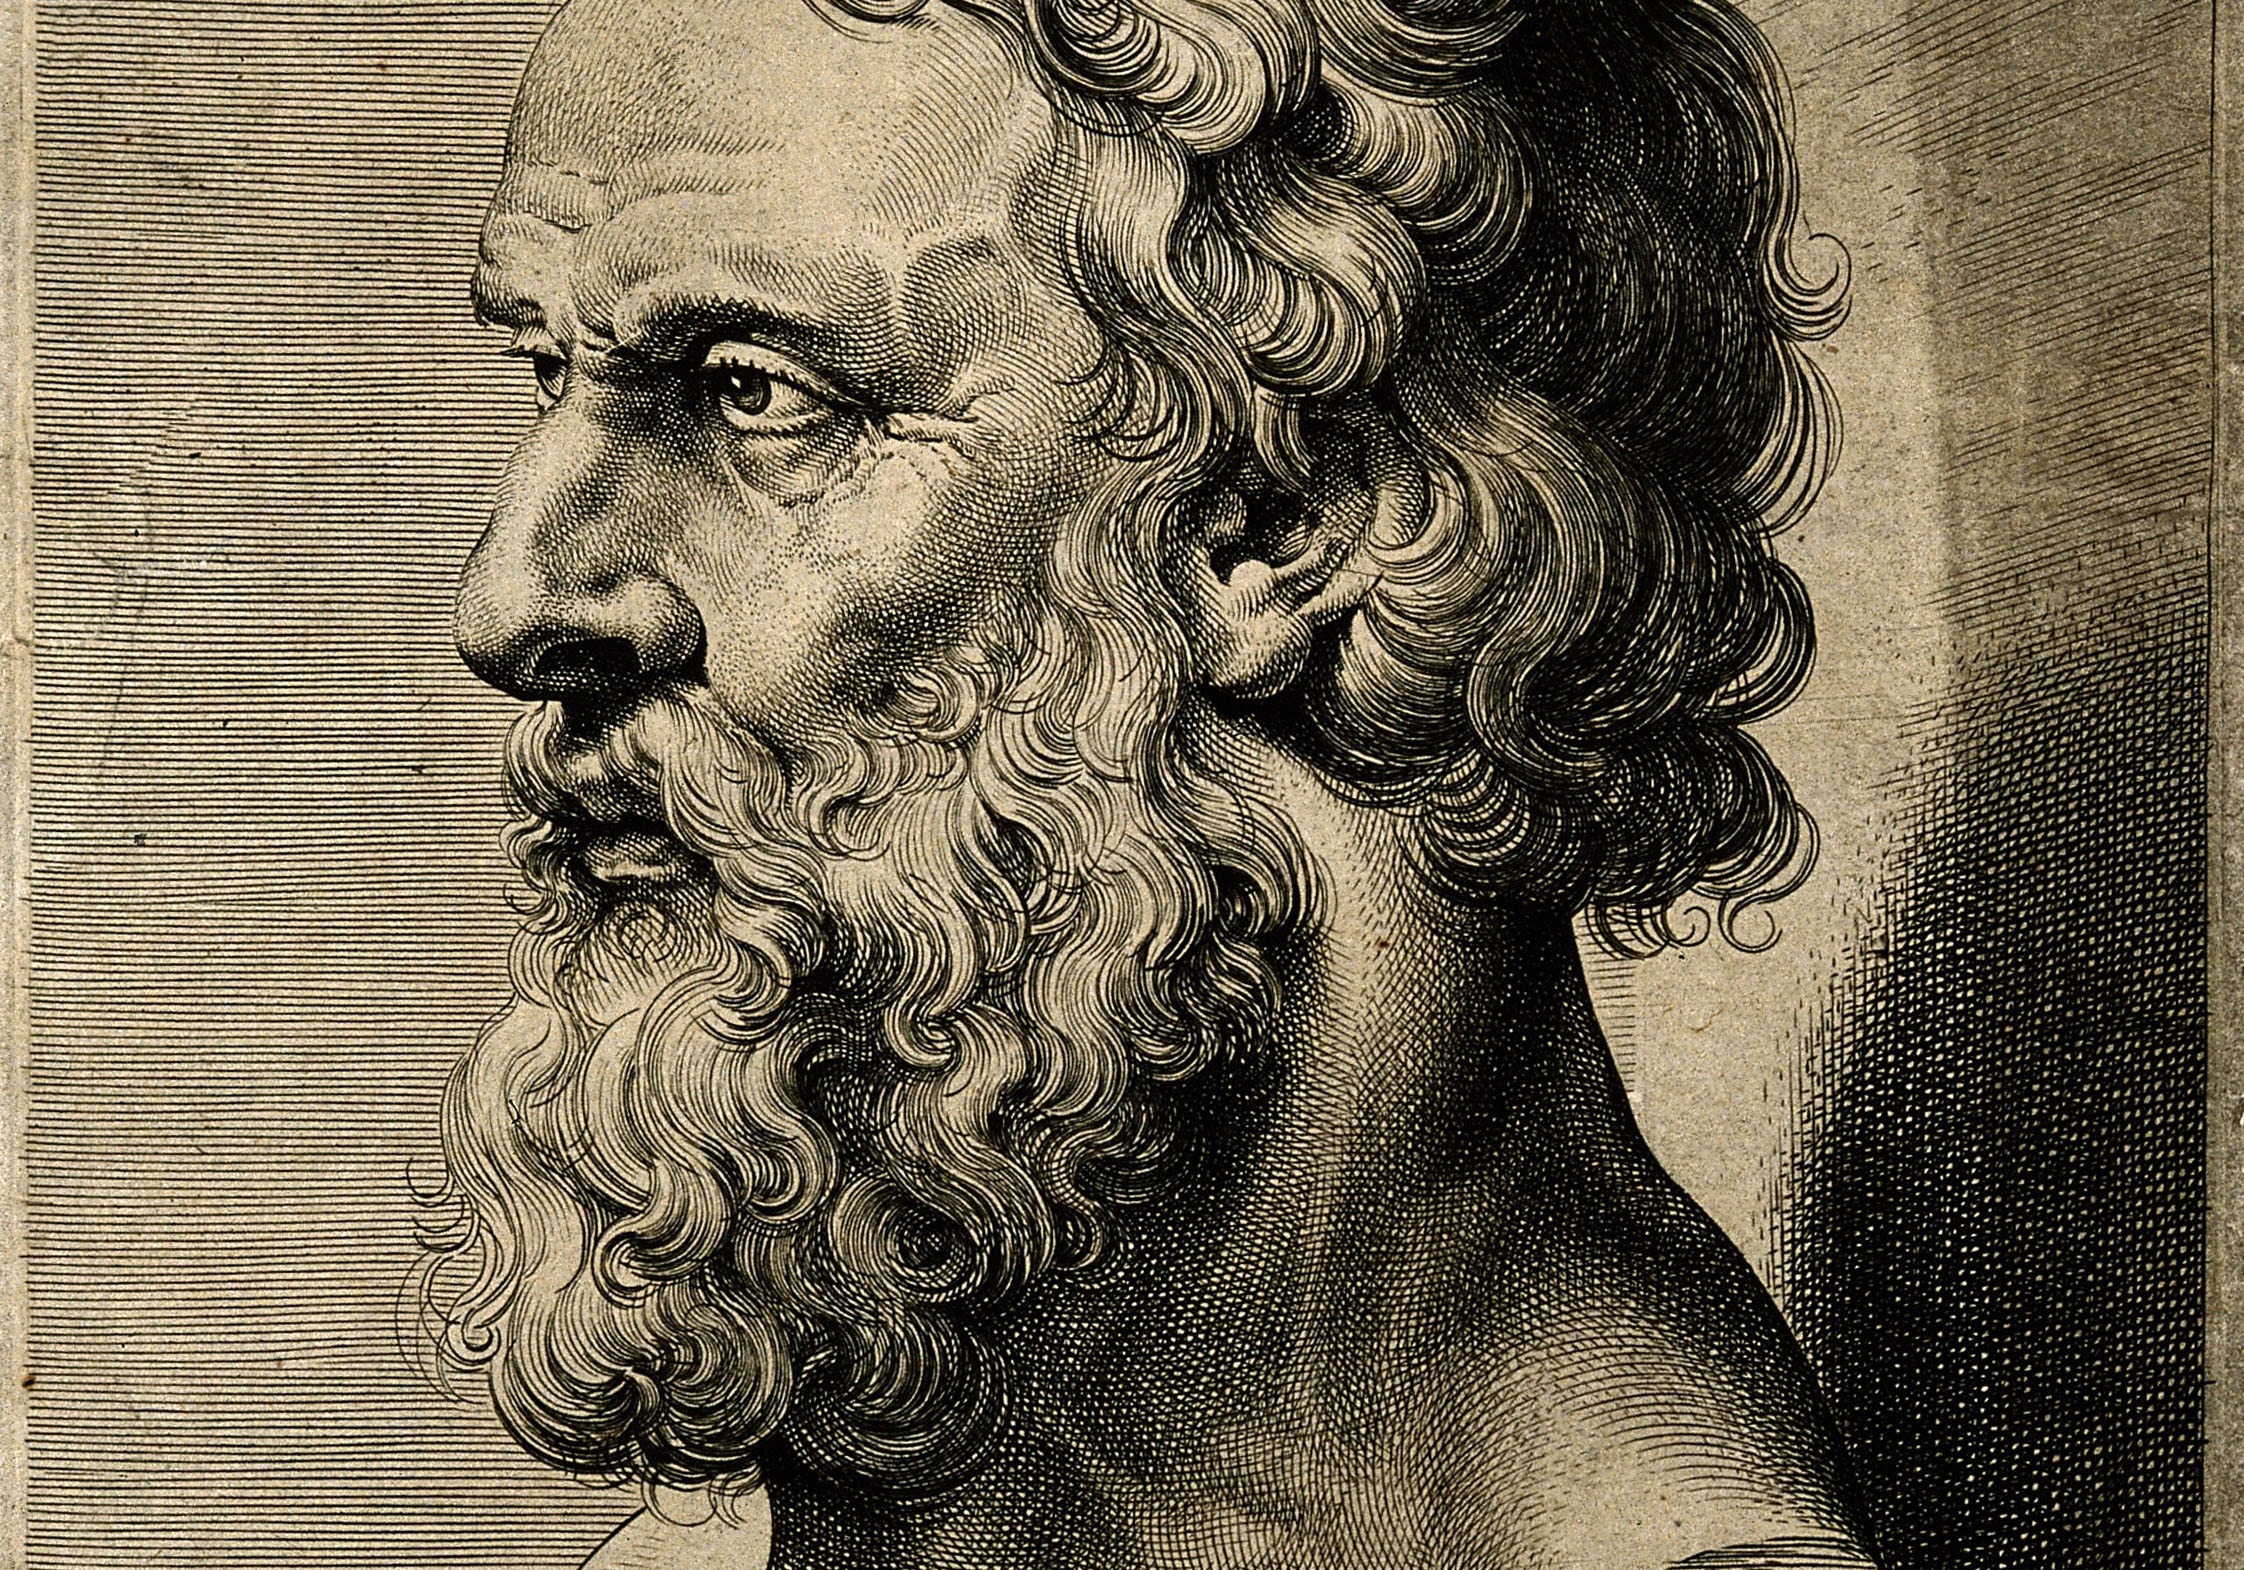 Plato's Philosophy: 10 Breakthroughs That Contributed to Society